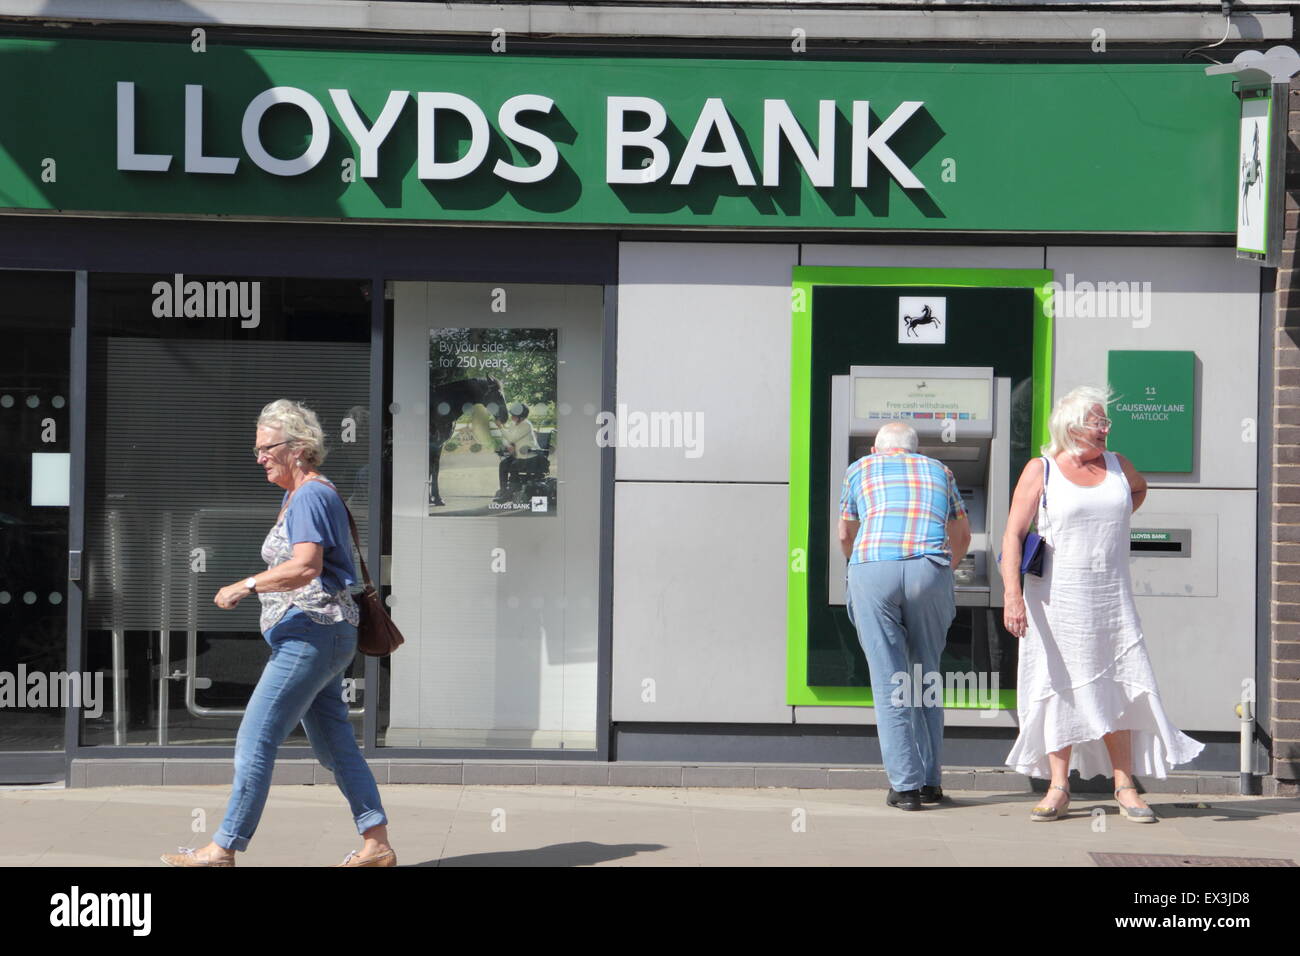 People use an ATM cashpoint machine at a Lloyds Bank branch in Derbyshire England UK Stock Photo